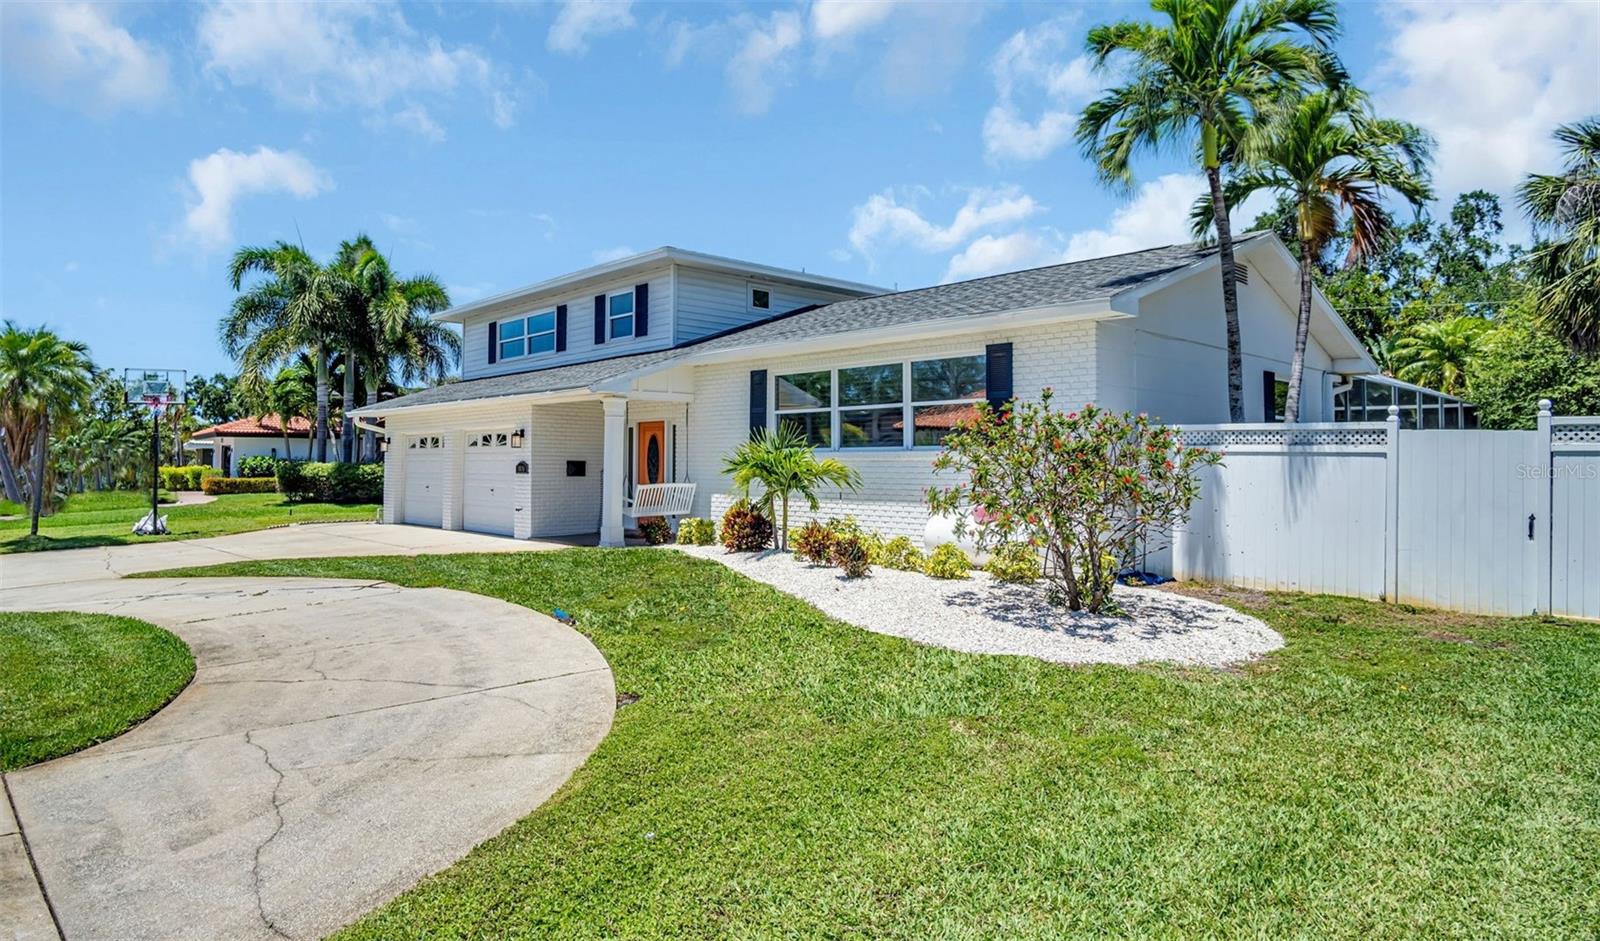 Located on a quiet little island, off the beaten path in Snell Isle, and so close to downtown! This peaceful home is within 10-15 driving minutes from our waterfront parks, Beach Drive, DTSP, and all the museums, restaurants, and local shops there.